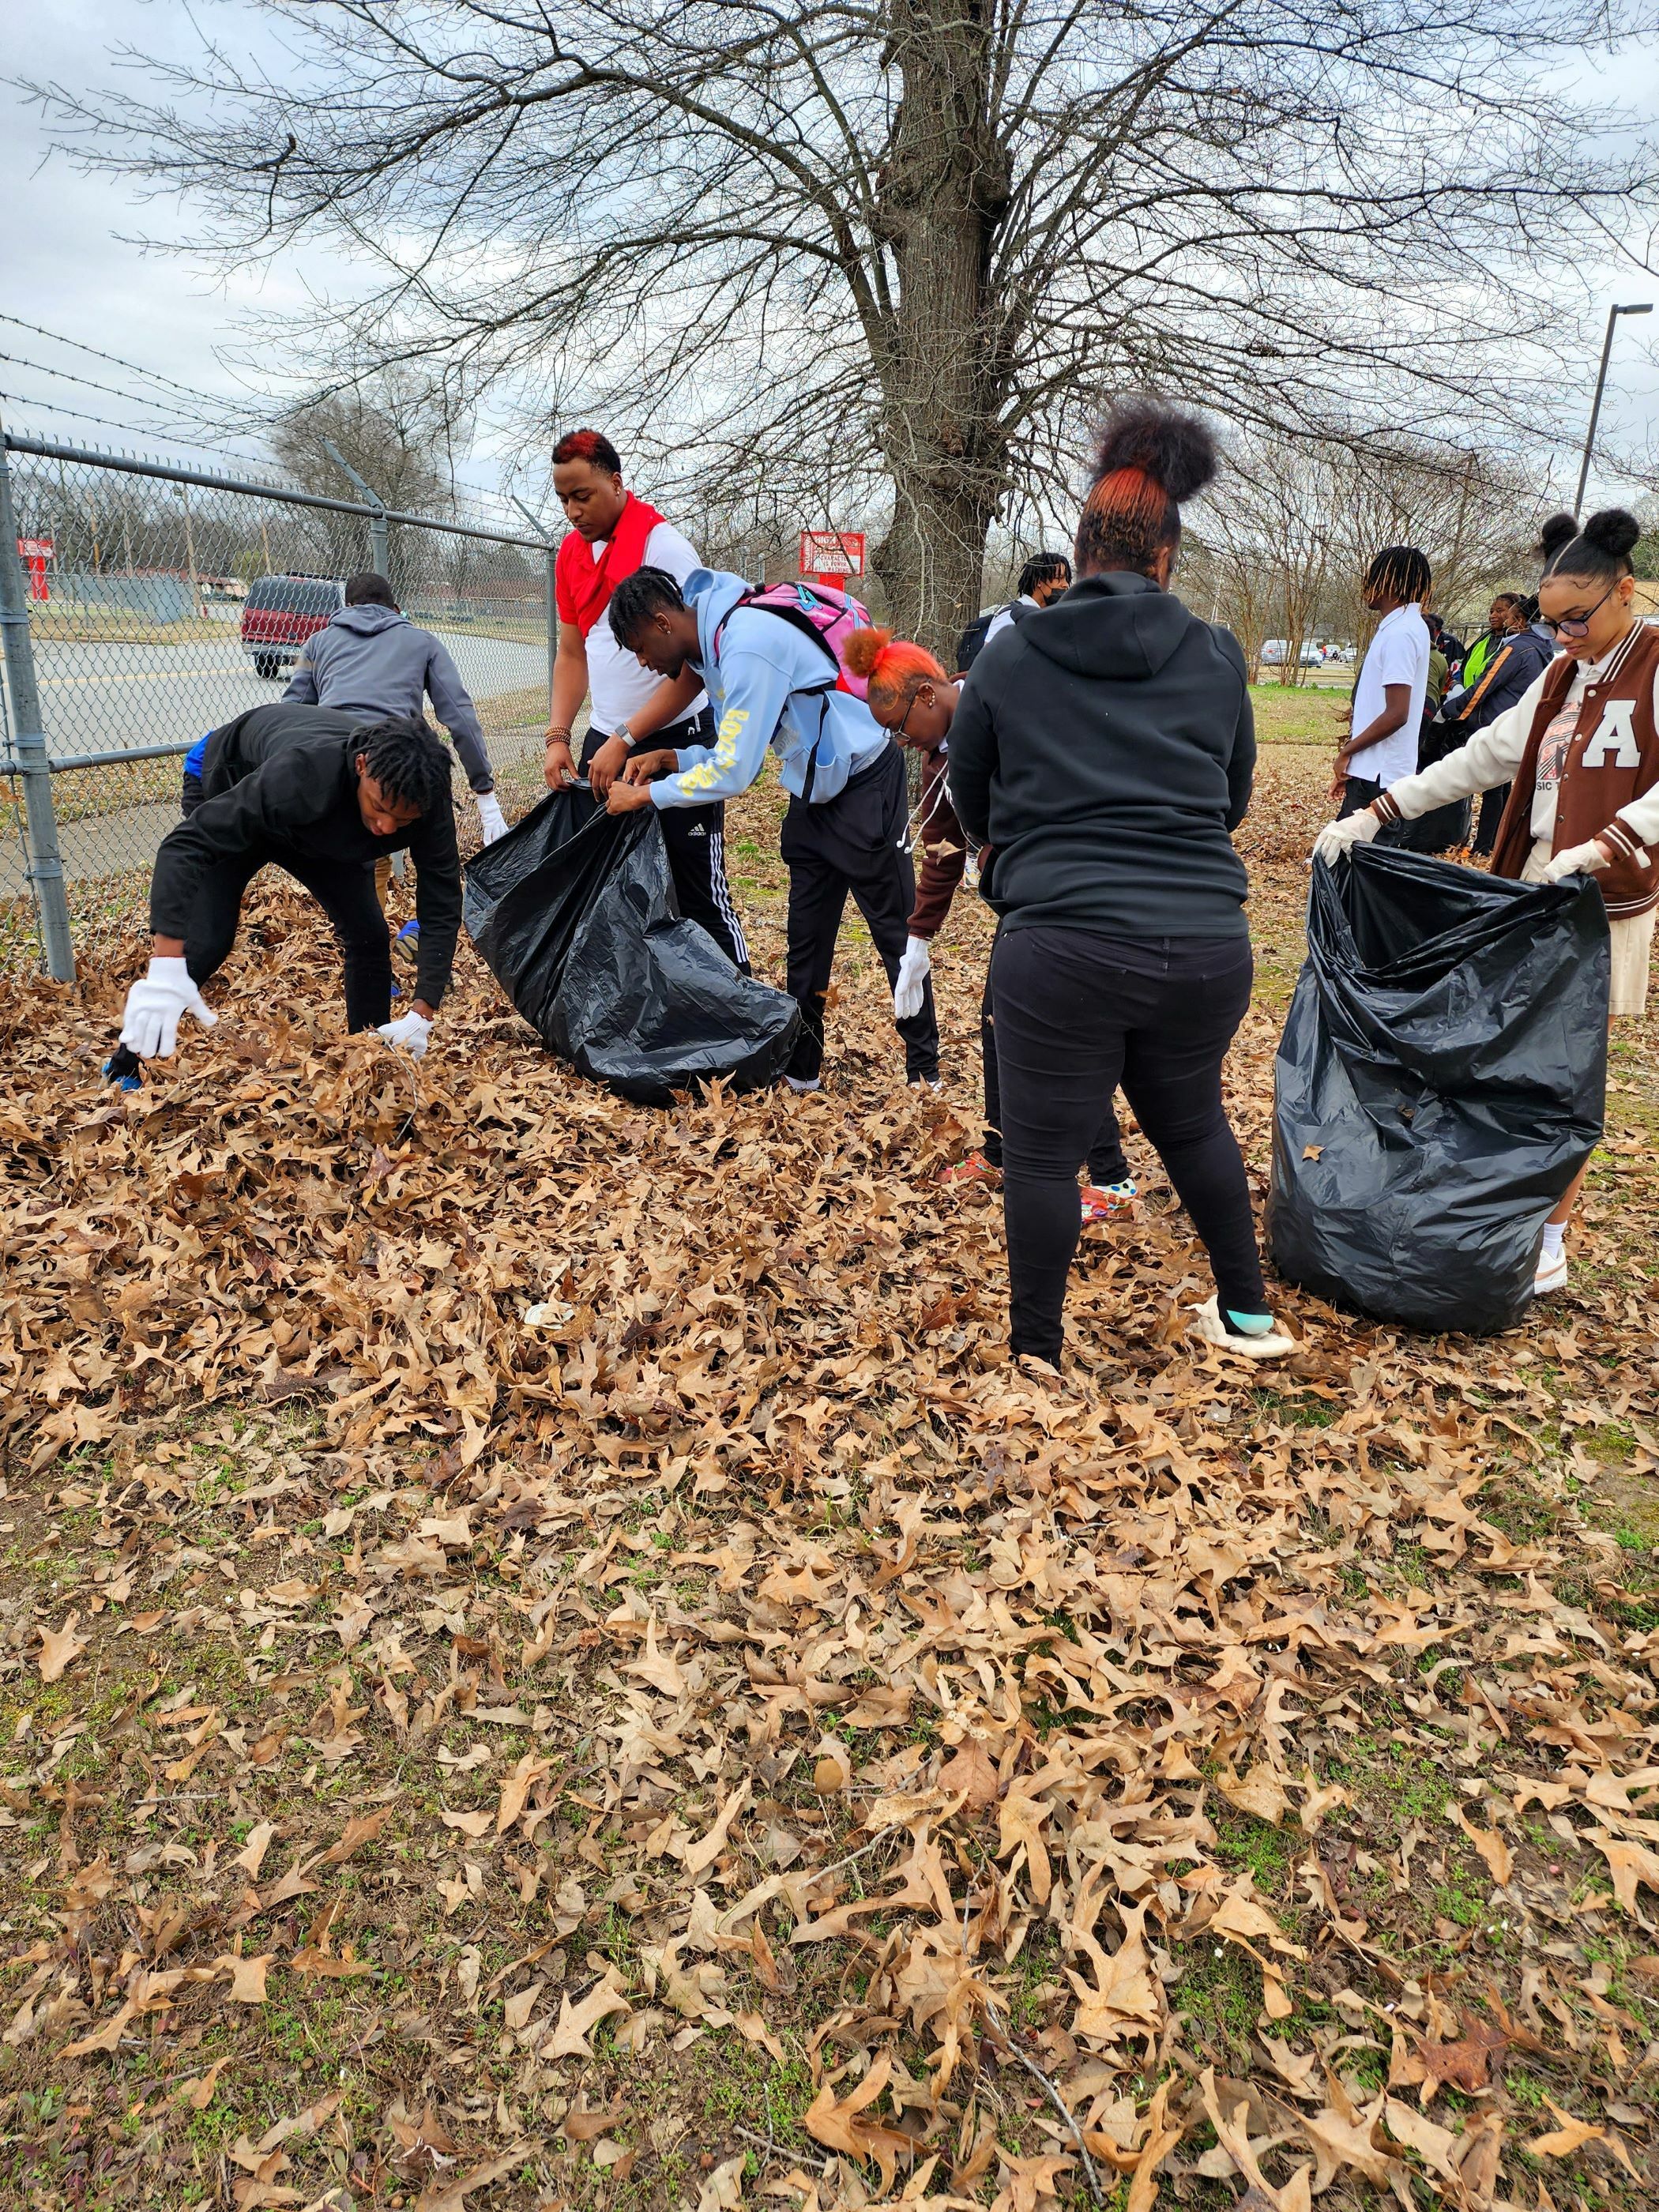 TyKesha Cross' students cleaning up the community.